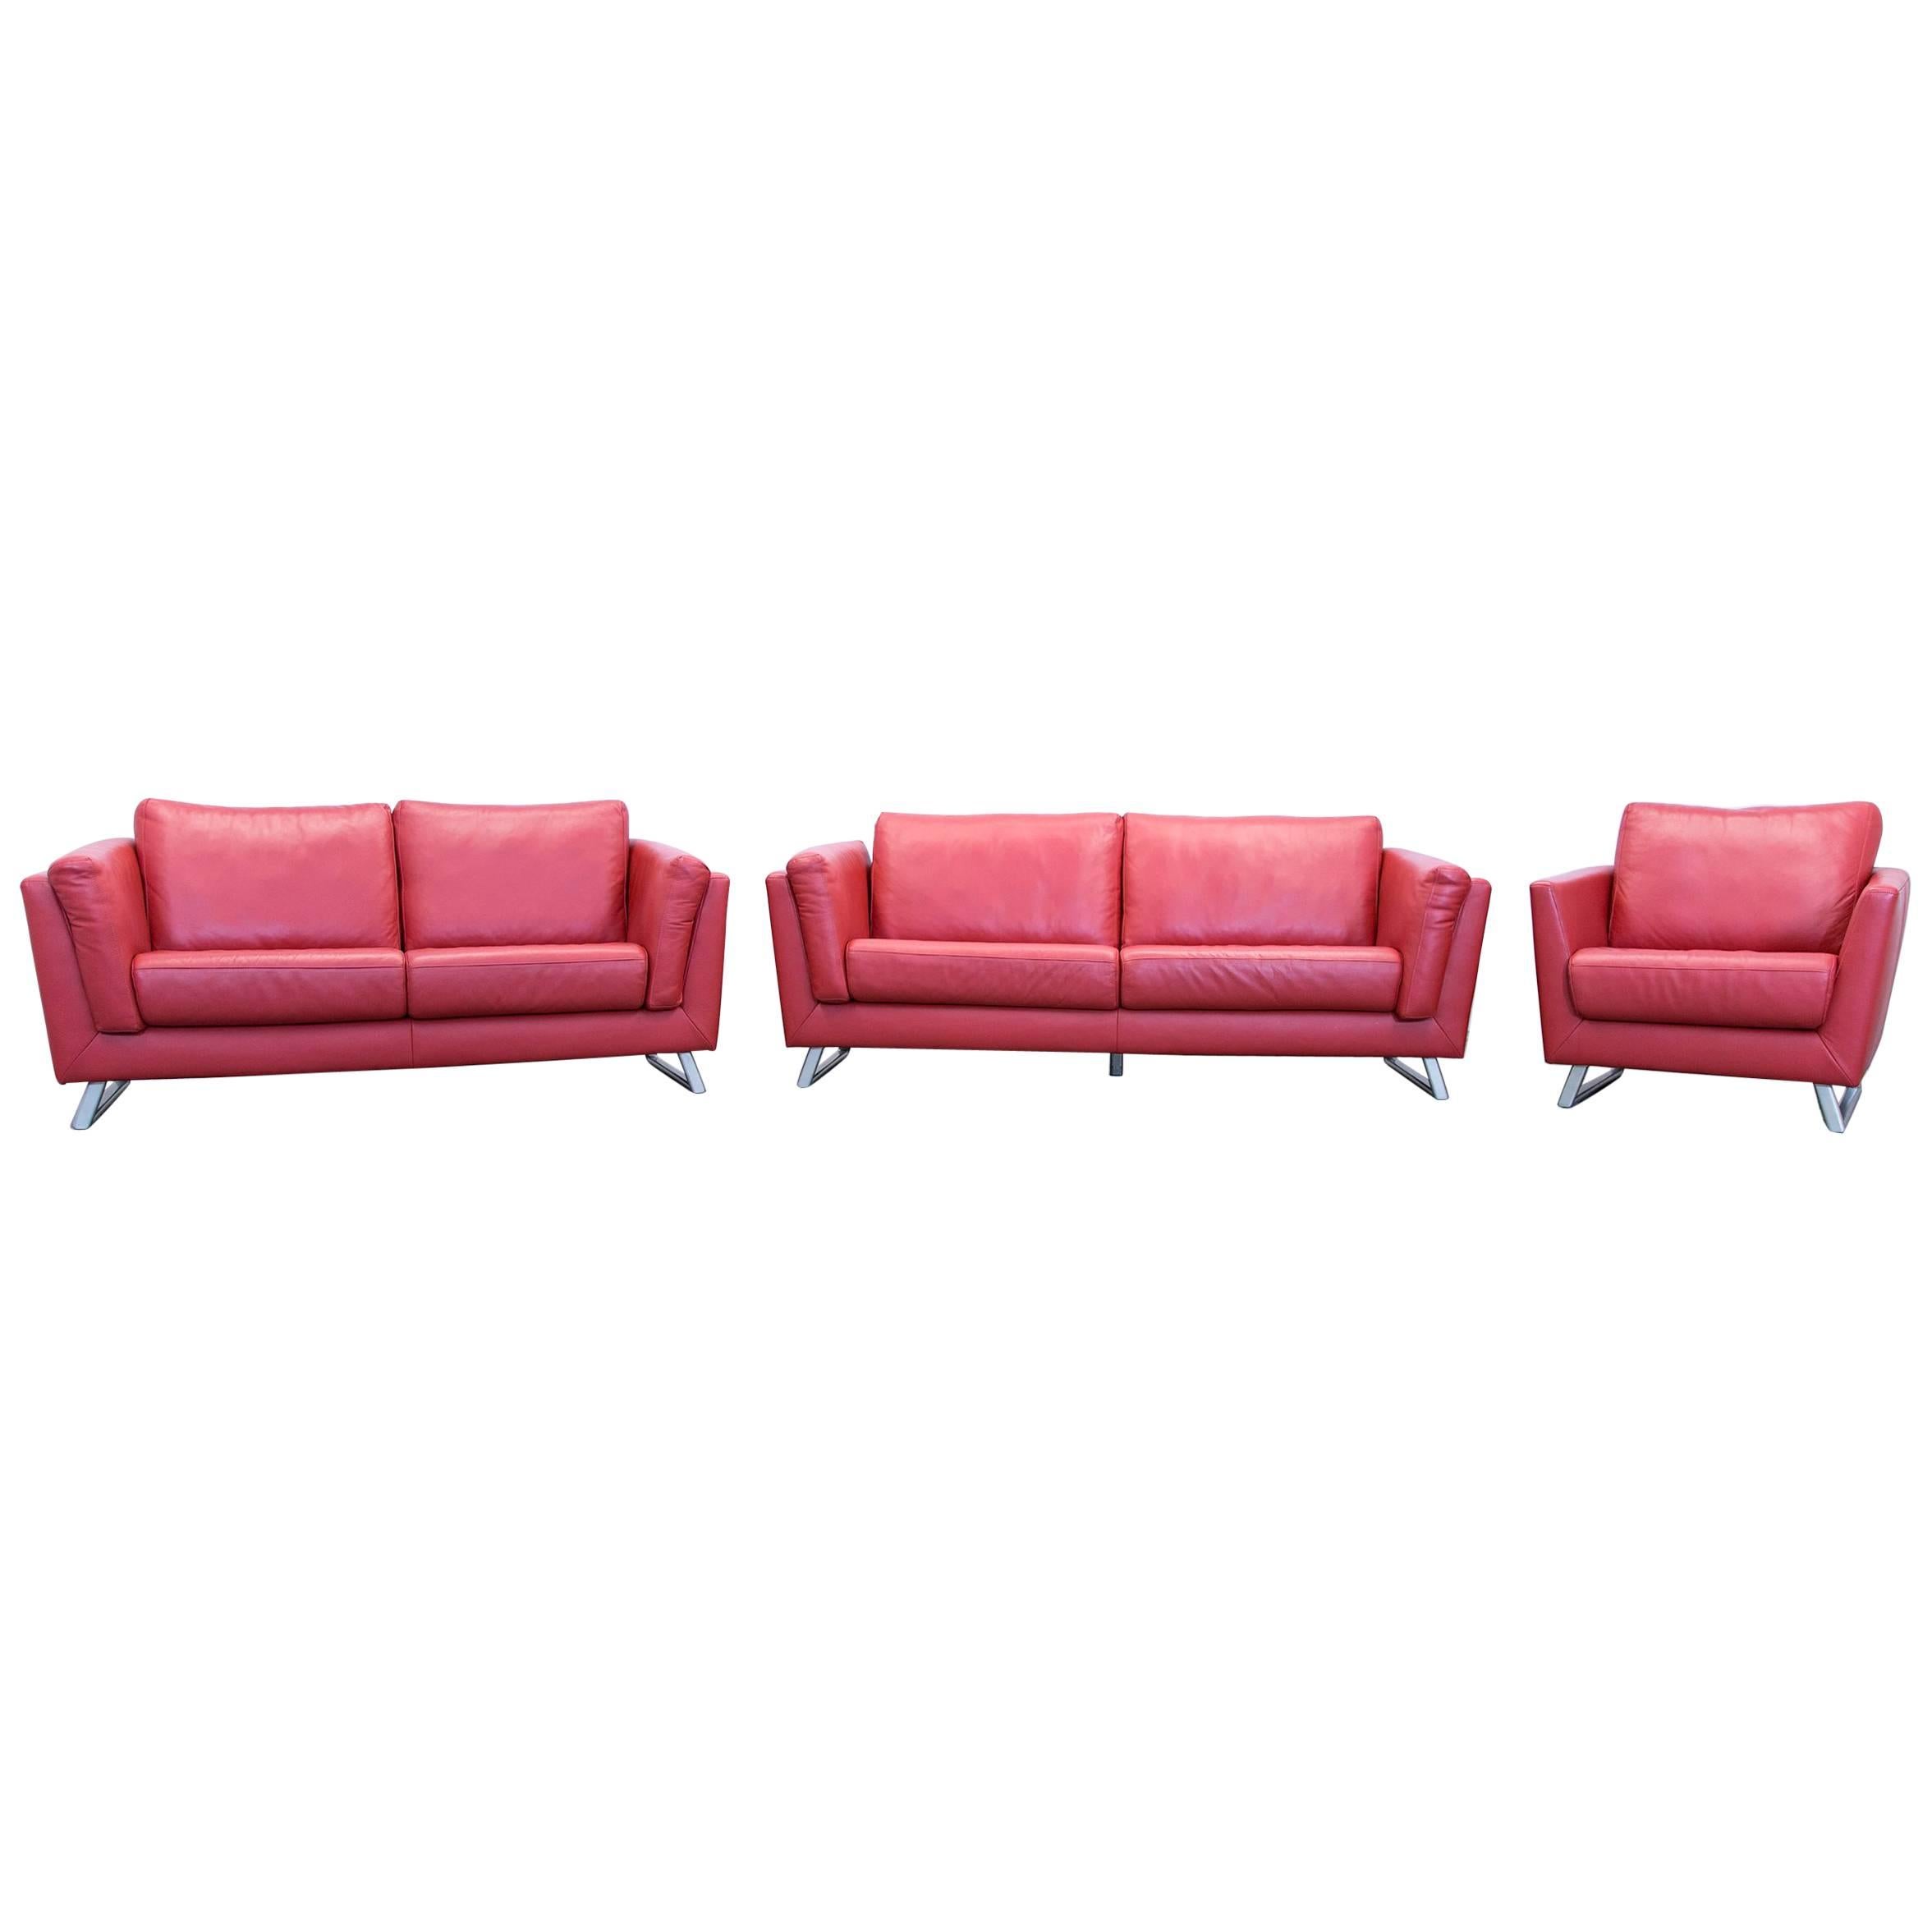 Designer Sofa Set Armchair Leather Red Three-Seat Couch Modern